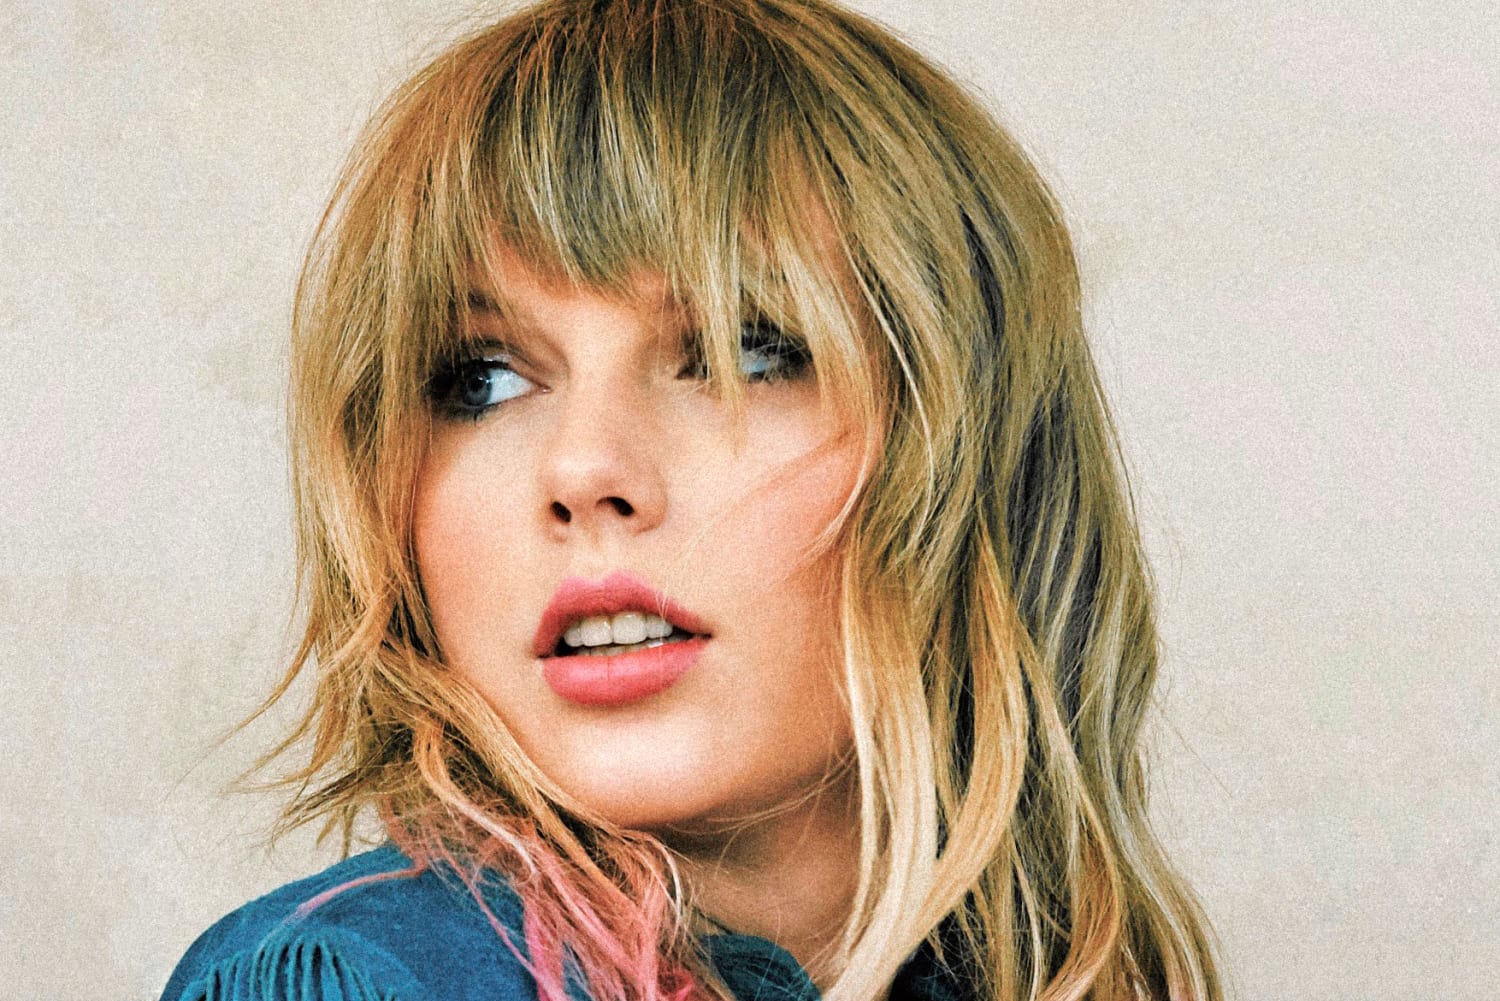 Why 'Lover' Is the Ultimate Taylor Swift Album